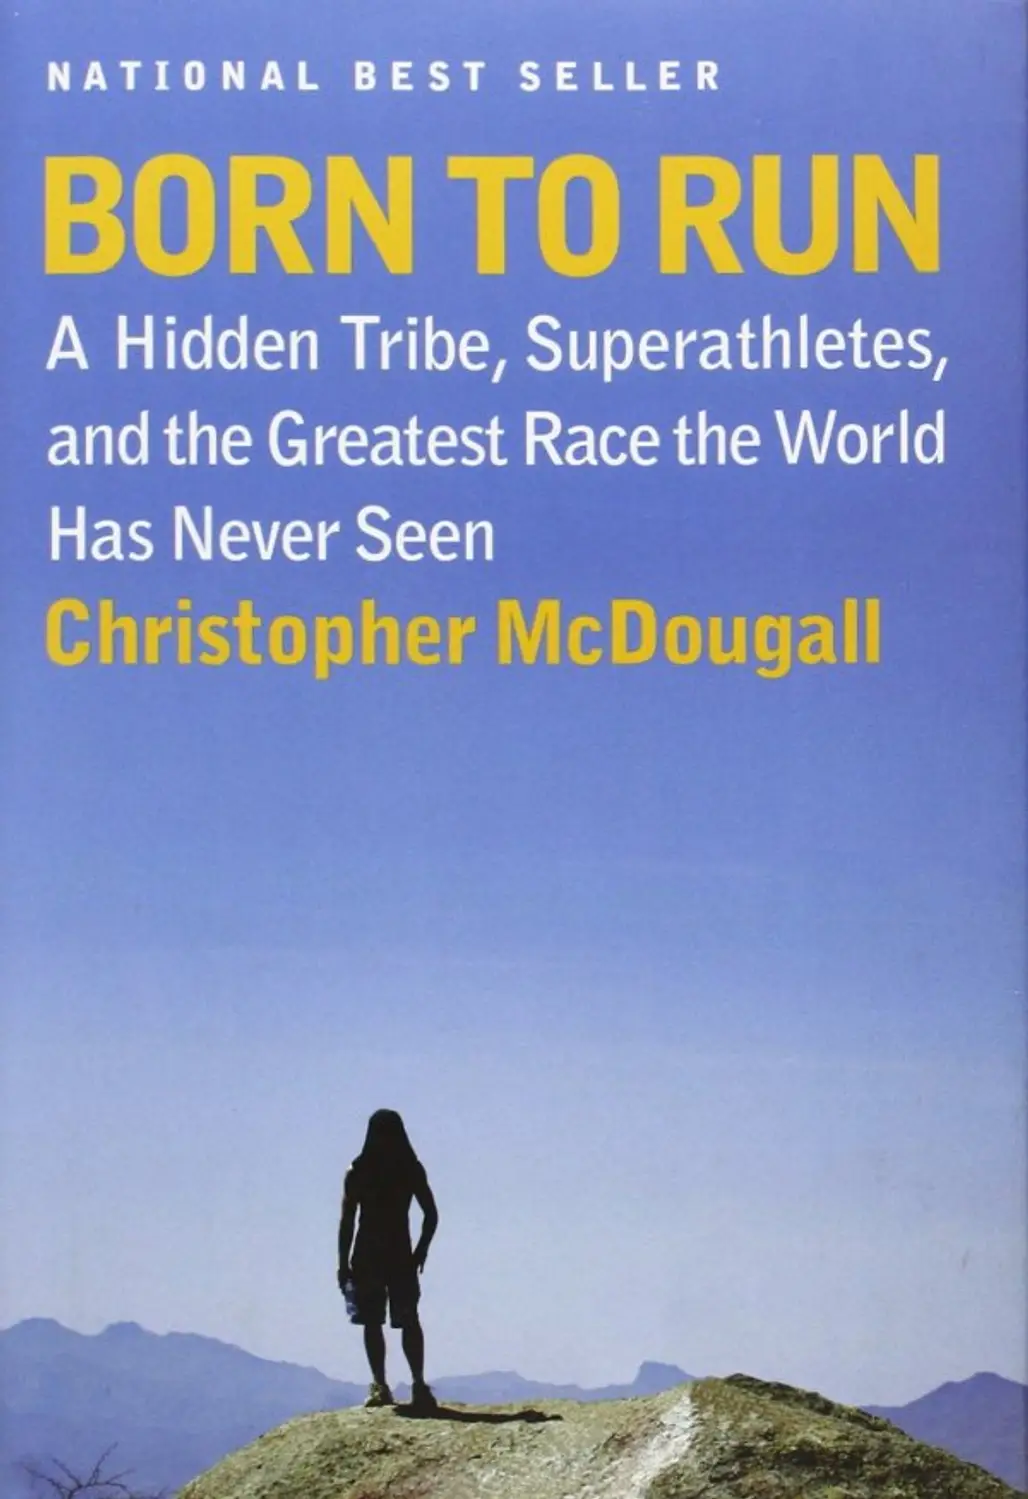 Born to Run - a Hidden Tribe, Superathletes, and the Greatest Race the World Has Never Seen by Christopher McDougall